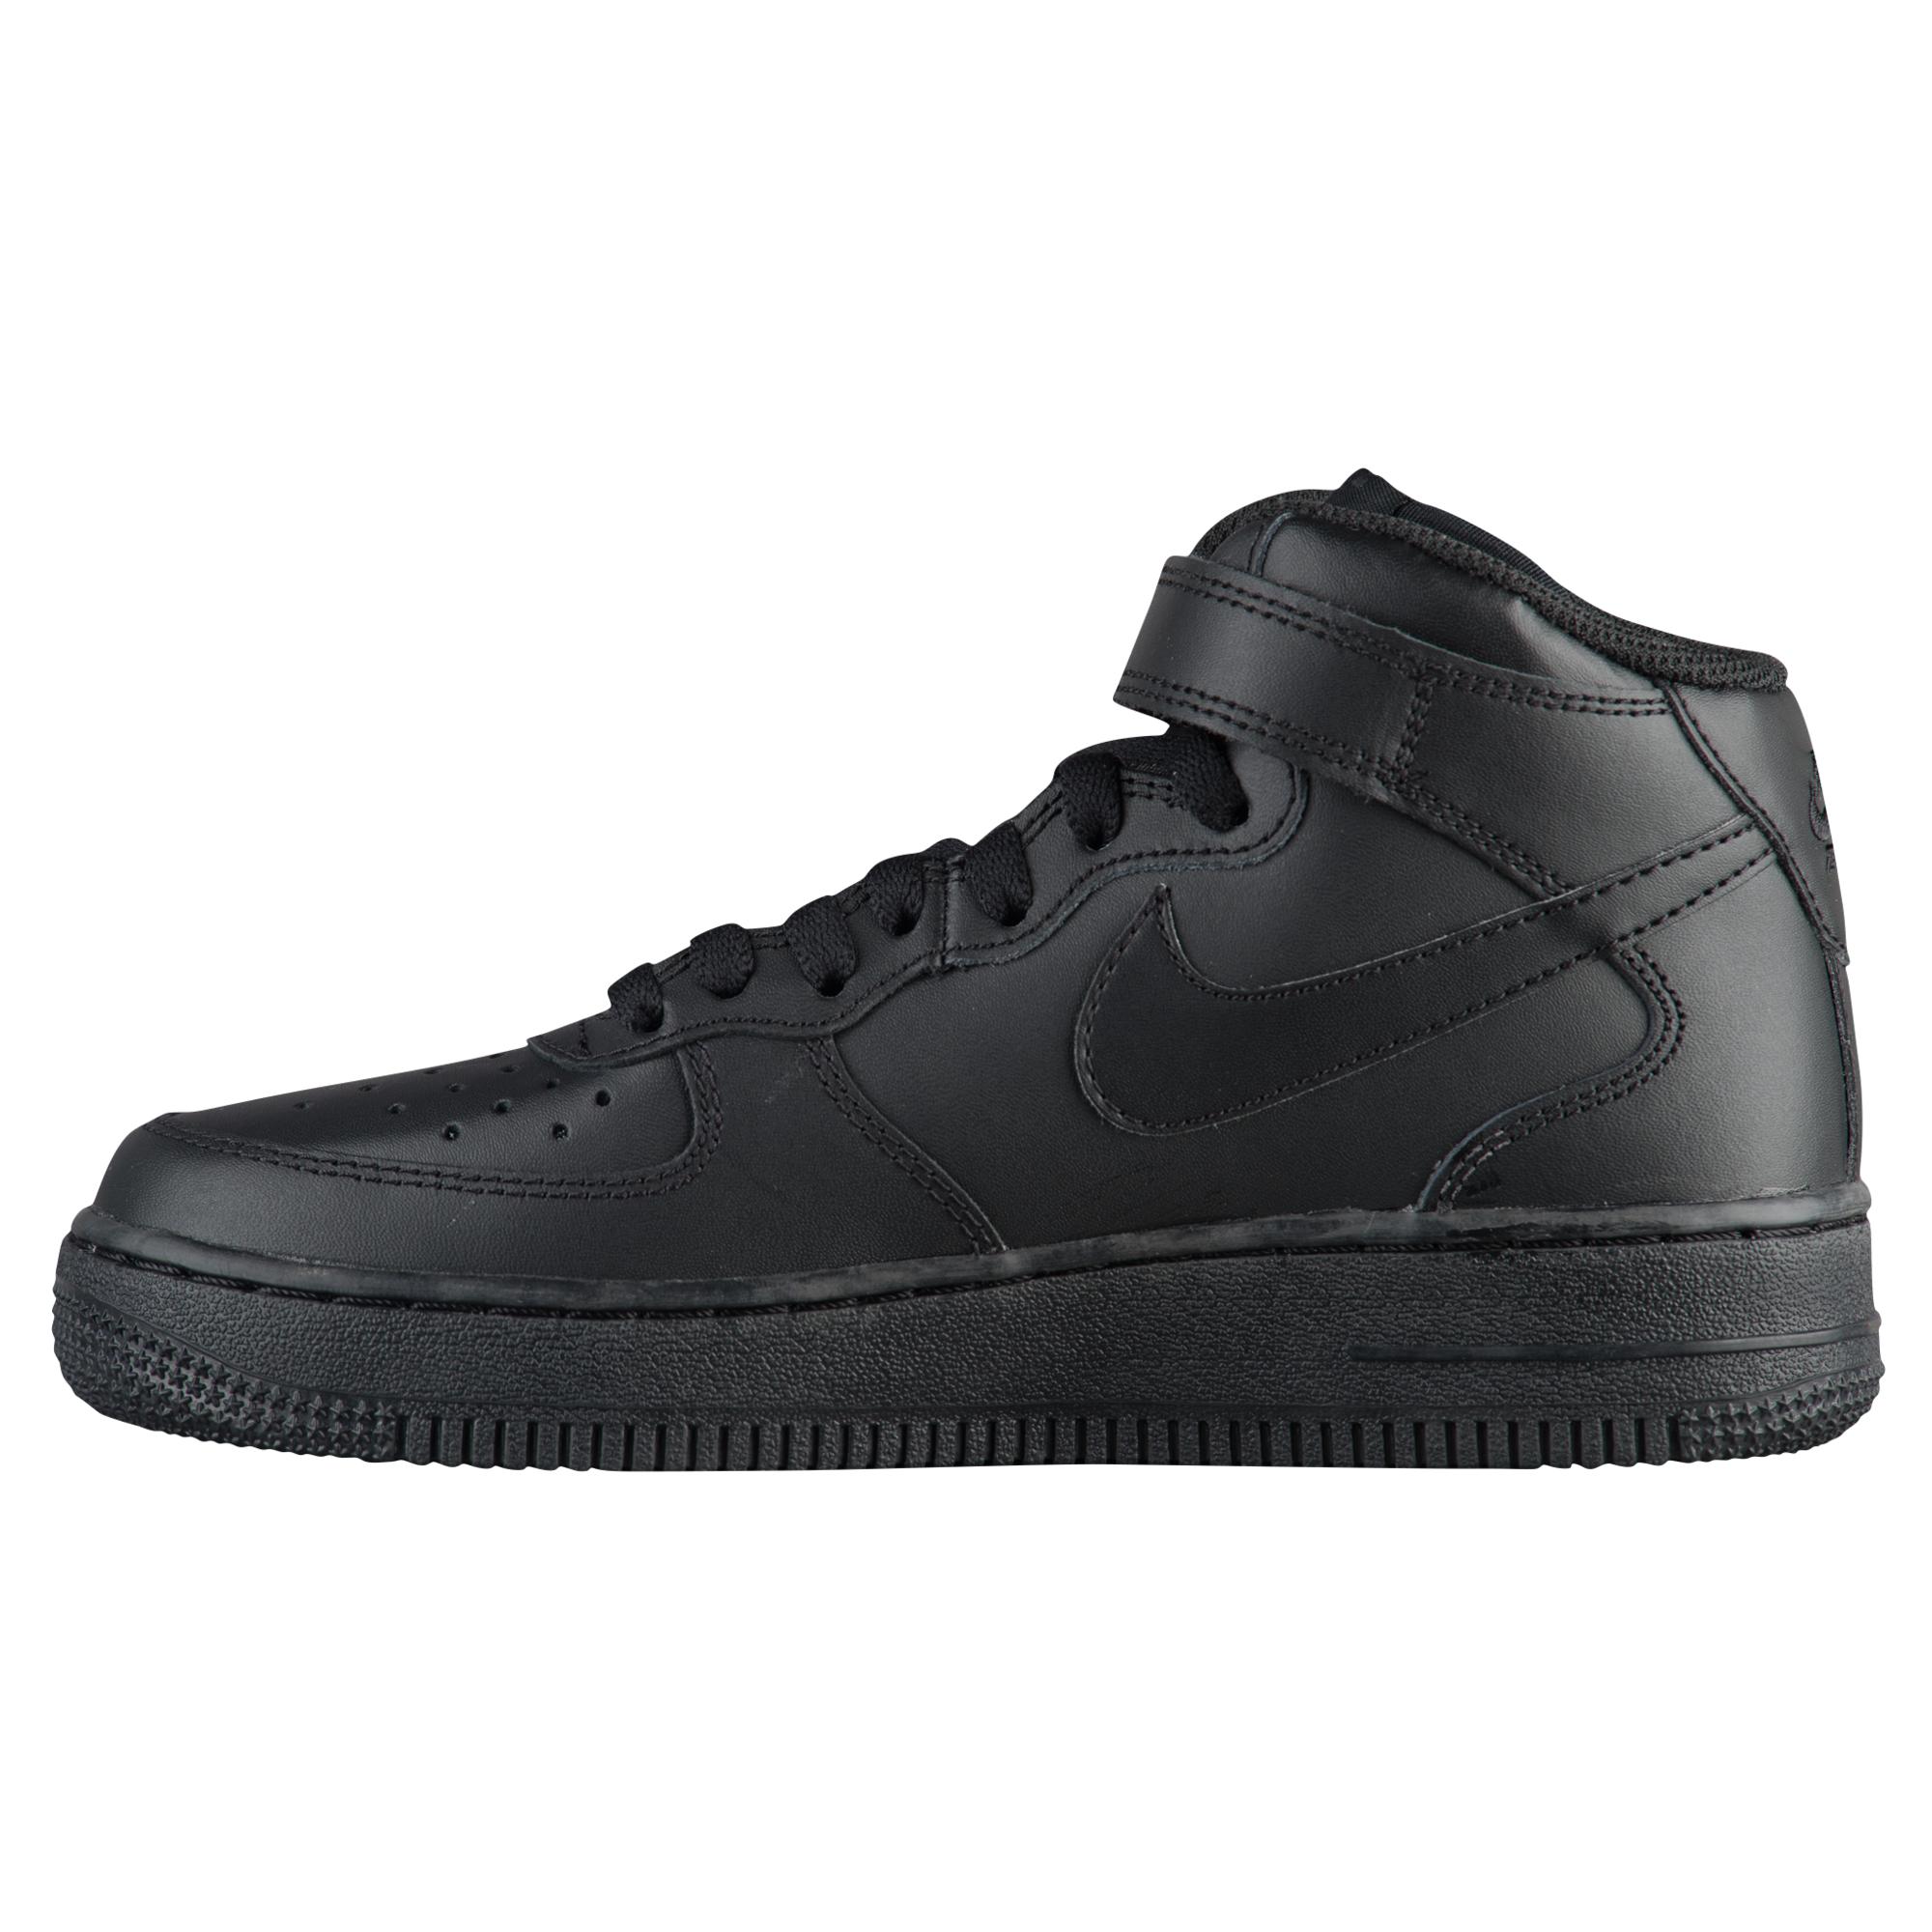 Nike Leather Air Force 1 Mid Basketball Shoes in Black for Men - Lyst